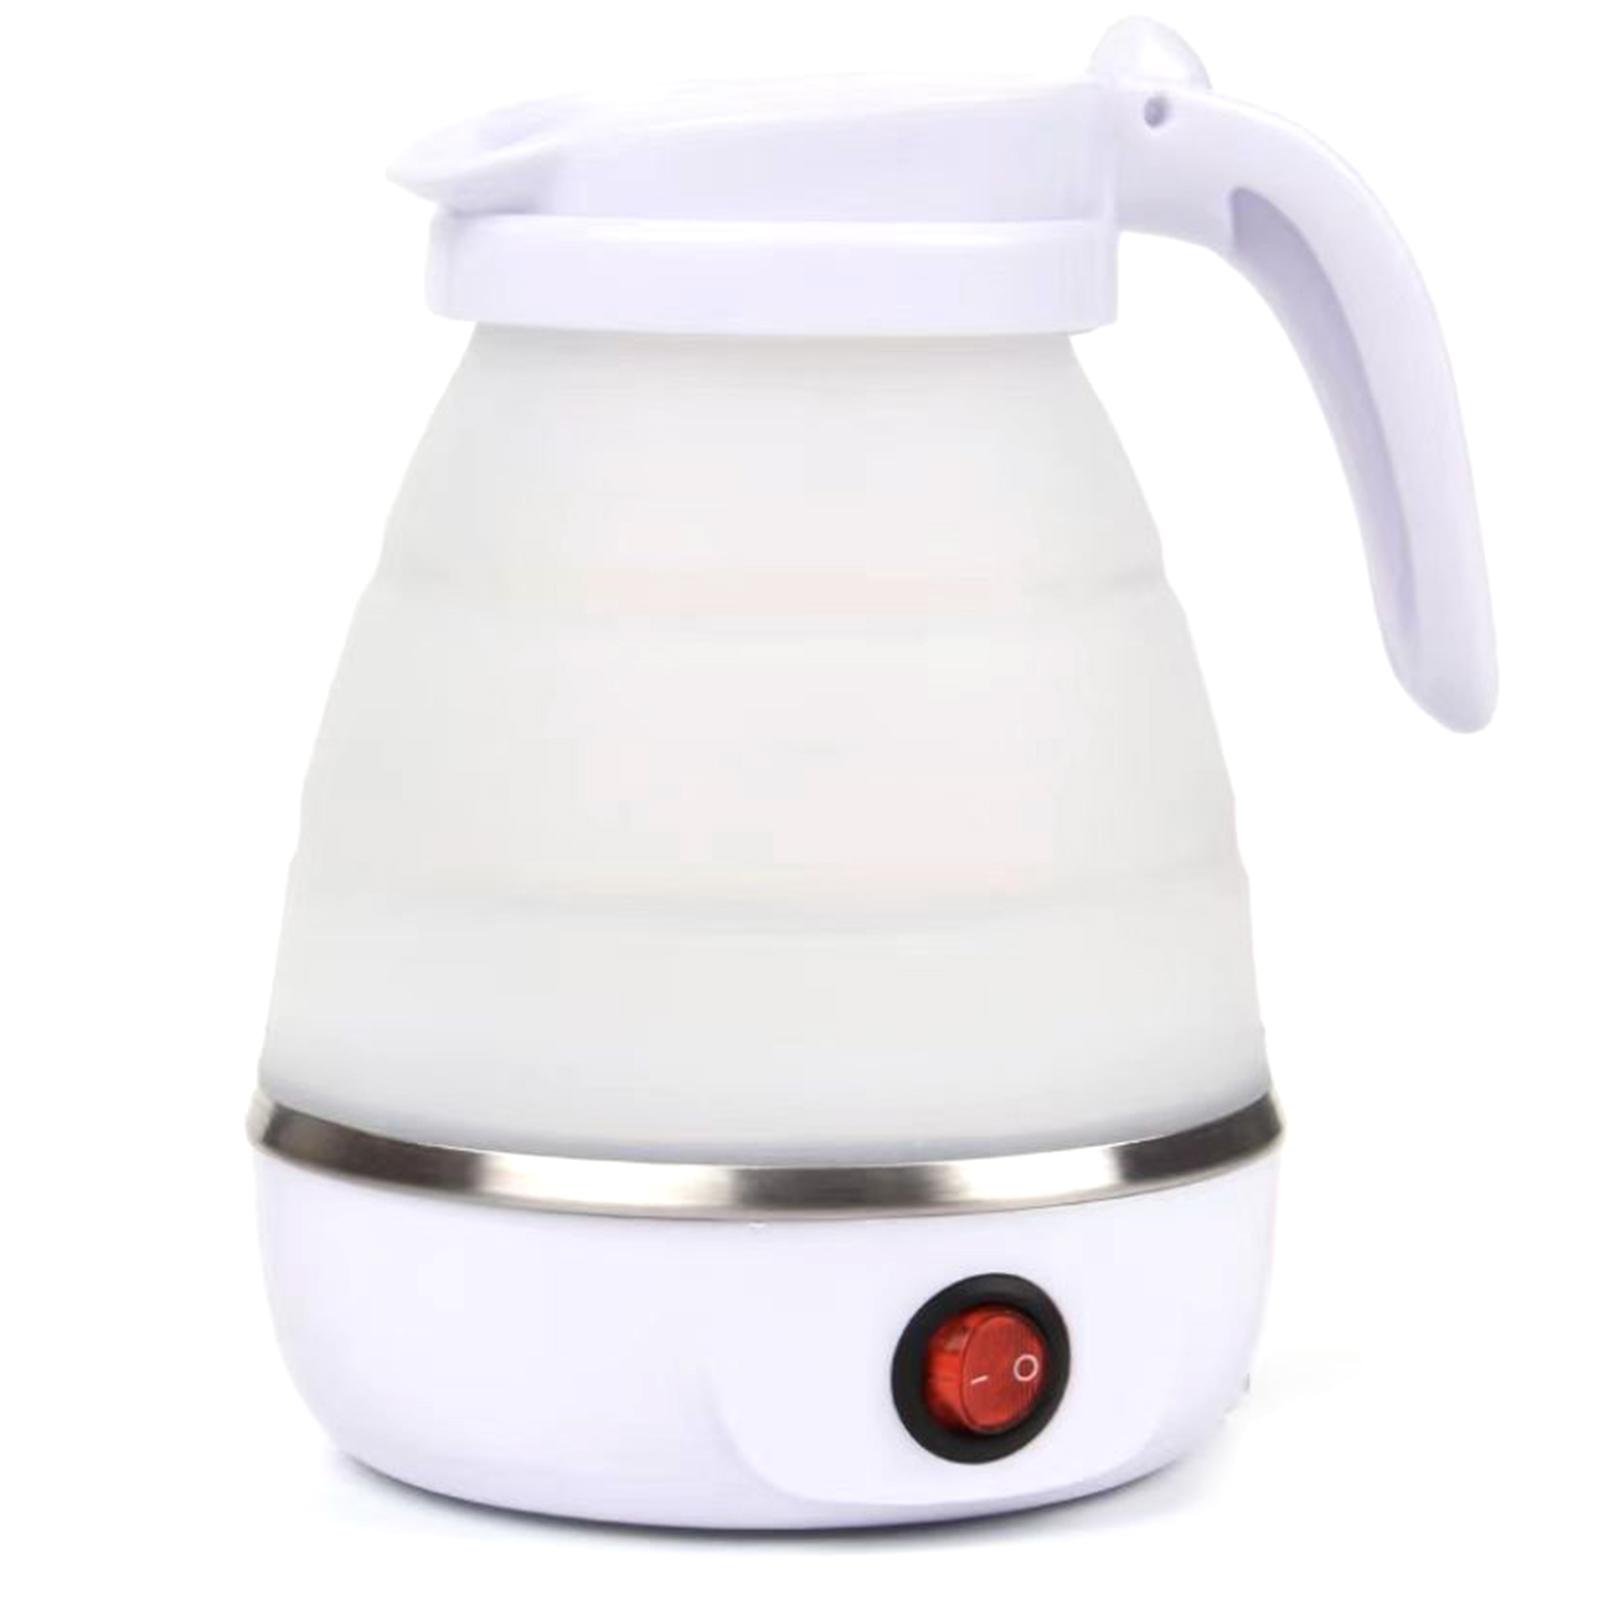 Travel Home Silicone Foldable Kettle Portable Automatic Electric Kettle